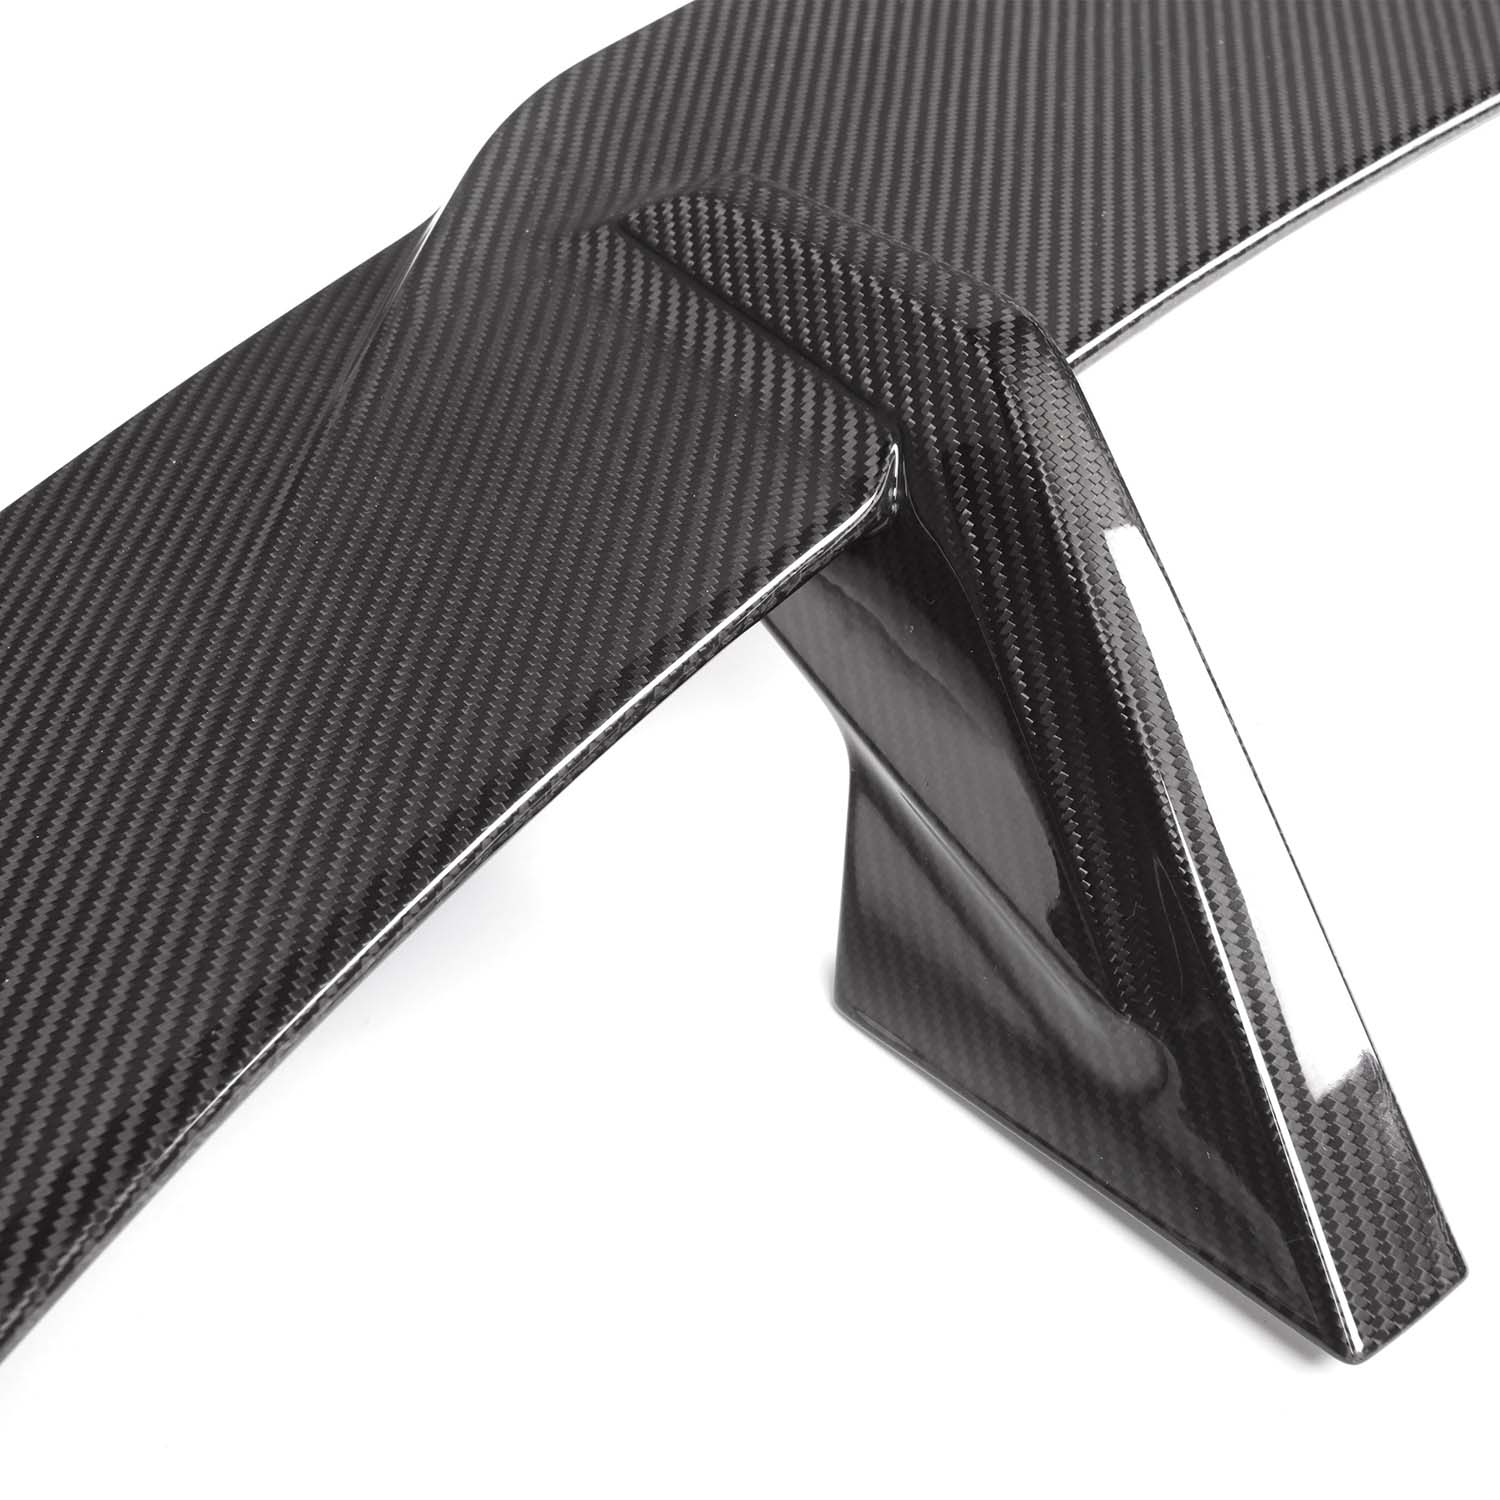 MHC+ BMW M3/M4 Performance Style Rear Wing In Pre Preg Carbon Fibre (G80/G82)-R44 Performance